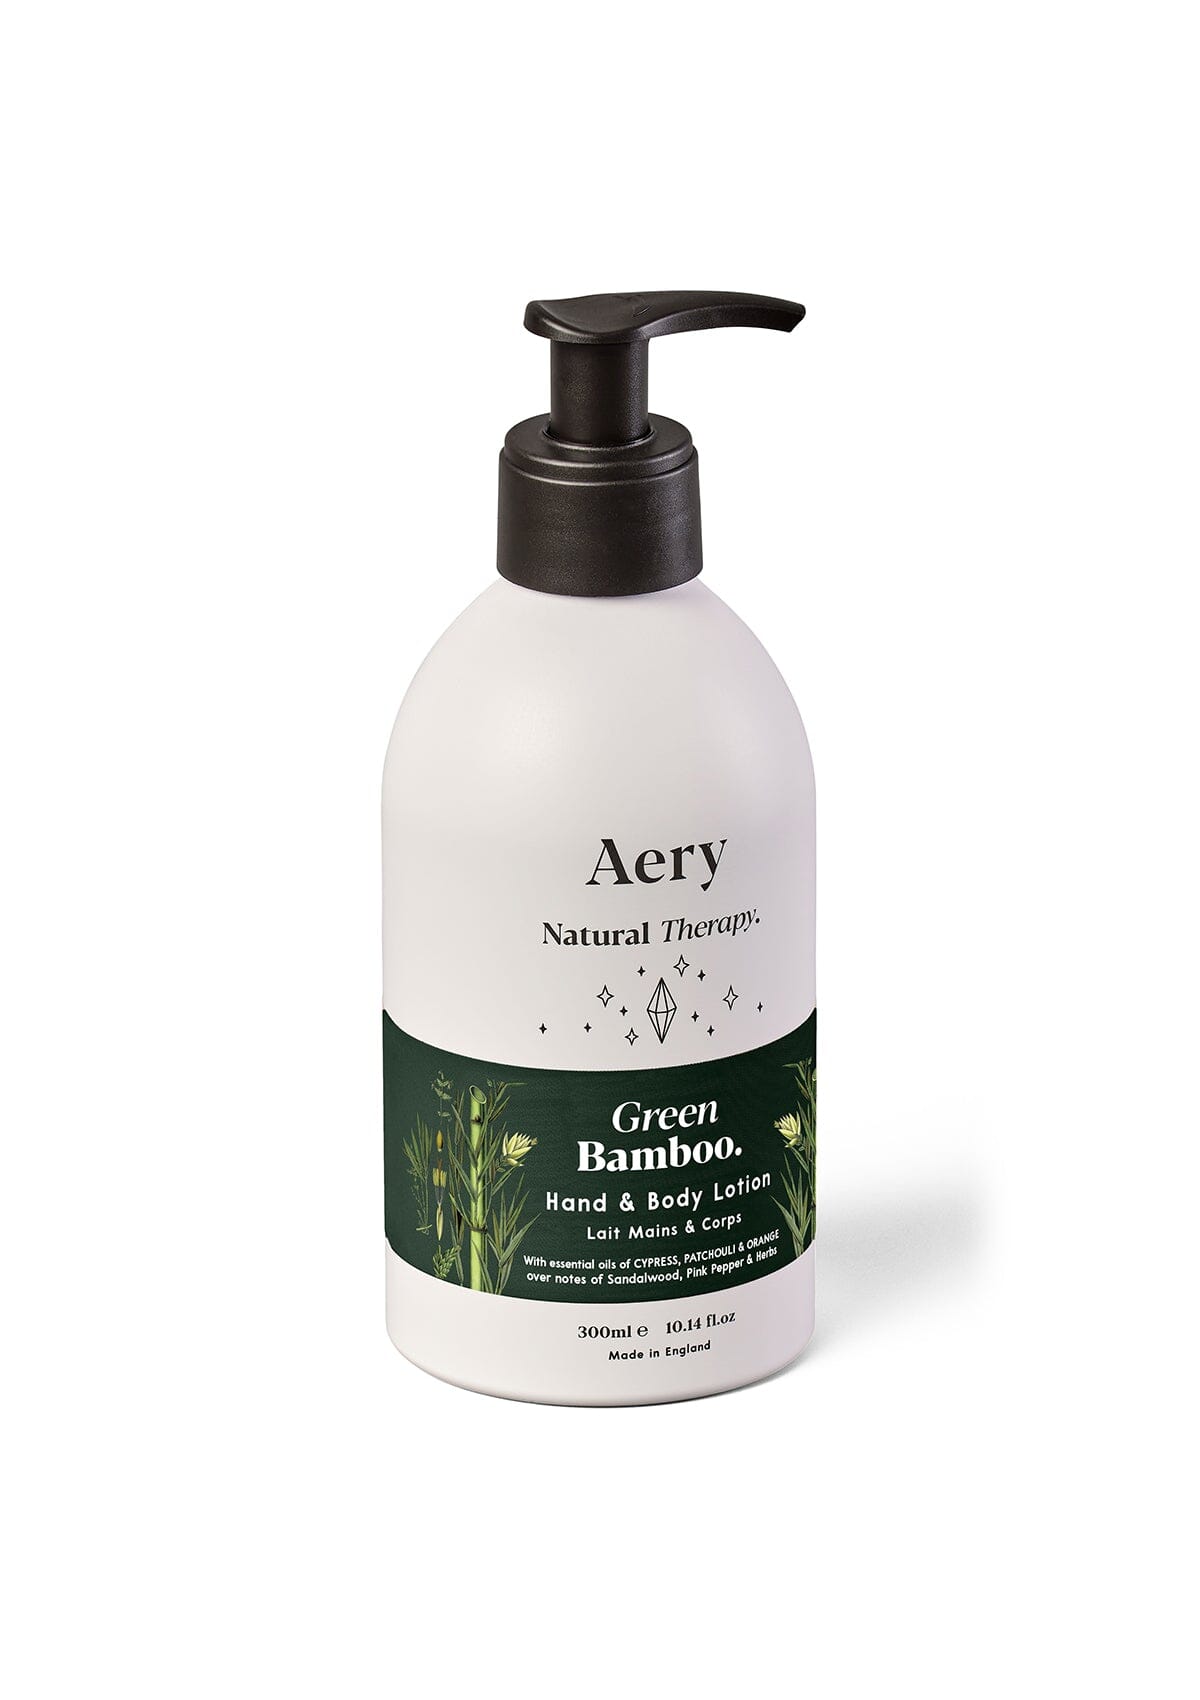 Green Bamboo Hand and Body Lotion by Aery displayed on white background